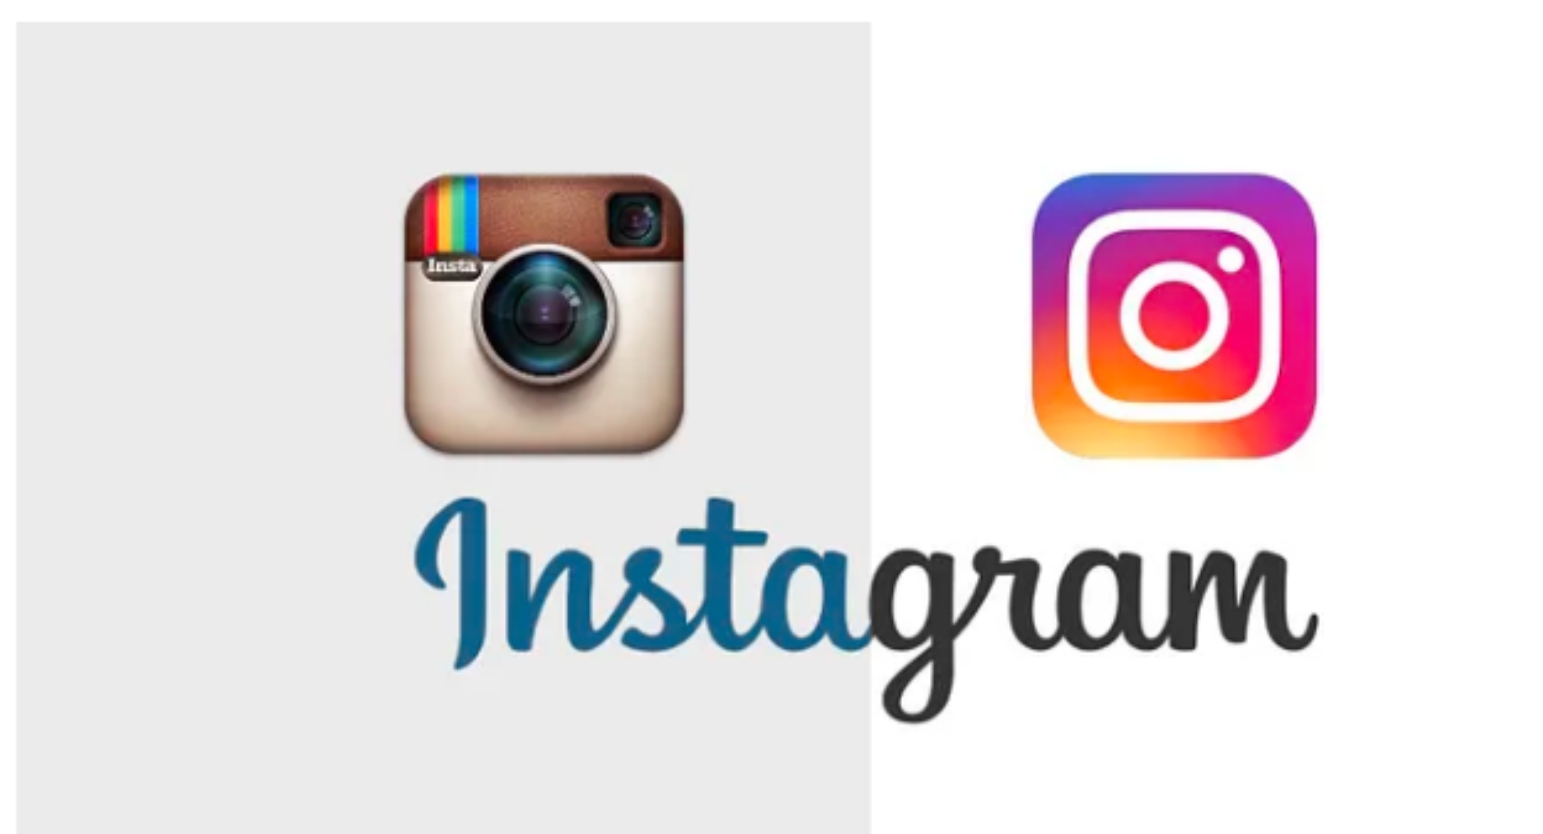 The image shows Instagram's old logo on the left and the new logo on the right, with Instagram written below the two logos.